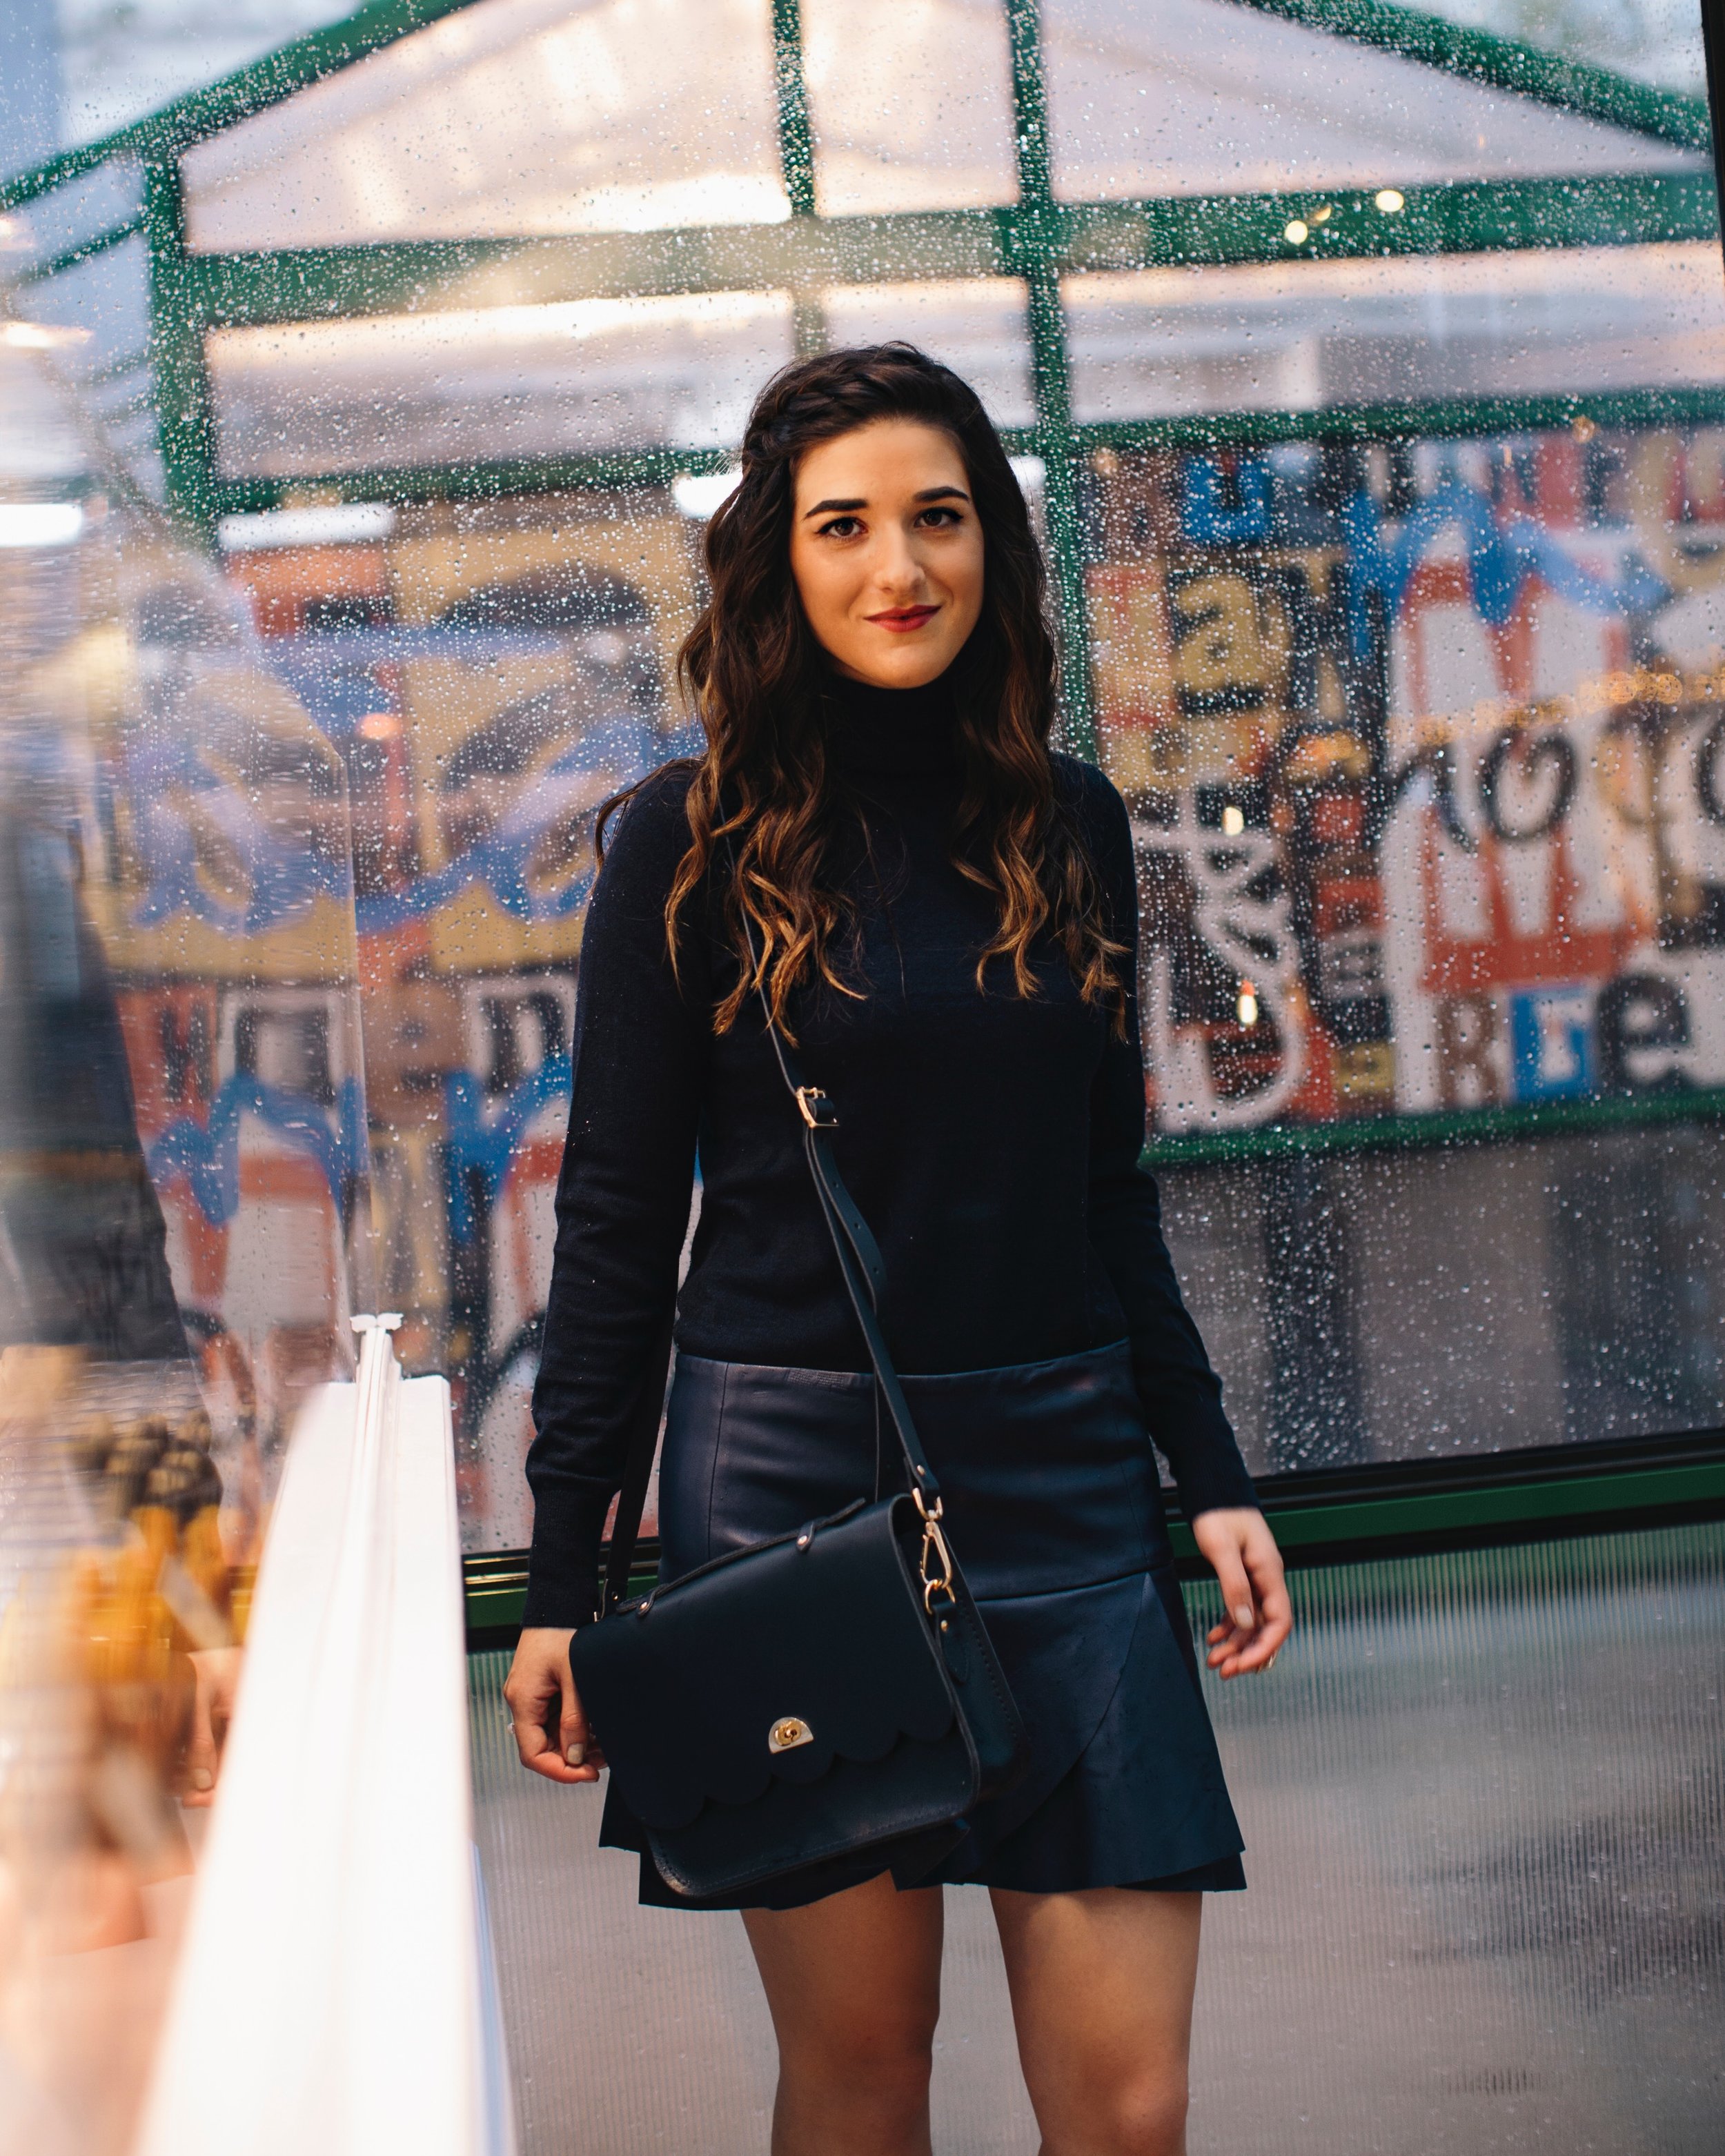 All Navy Look 20 Tips To Build Your Instagram Following Louboutins & Love Fashion Blog Esther Santer NYC Street Style Blogger Outfit OOTD Trendy Cambridge Satchel Bag Purse Girl Women Hair Shoes Leopard Booties Turtleneck Accessory Rings Neutral Skirt.jpg